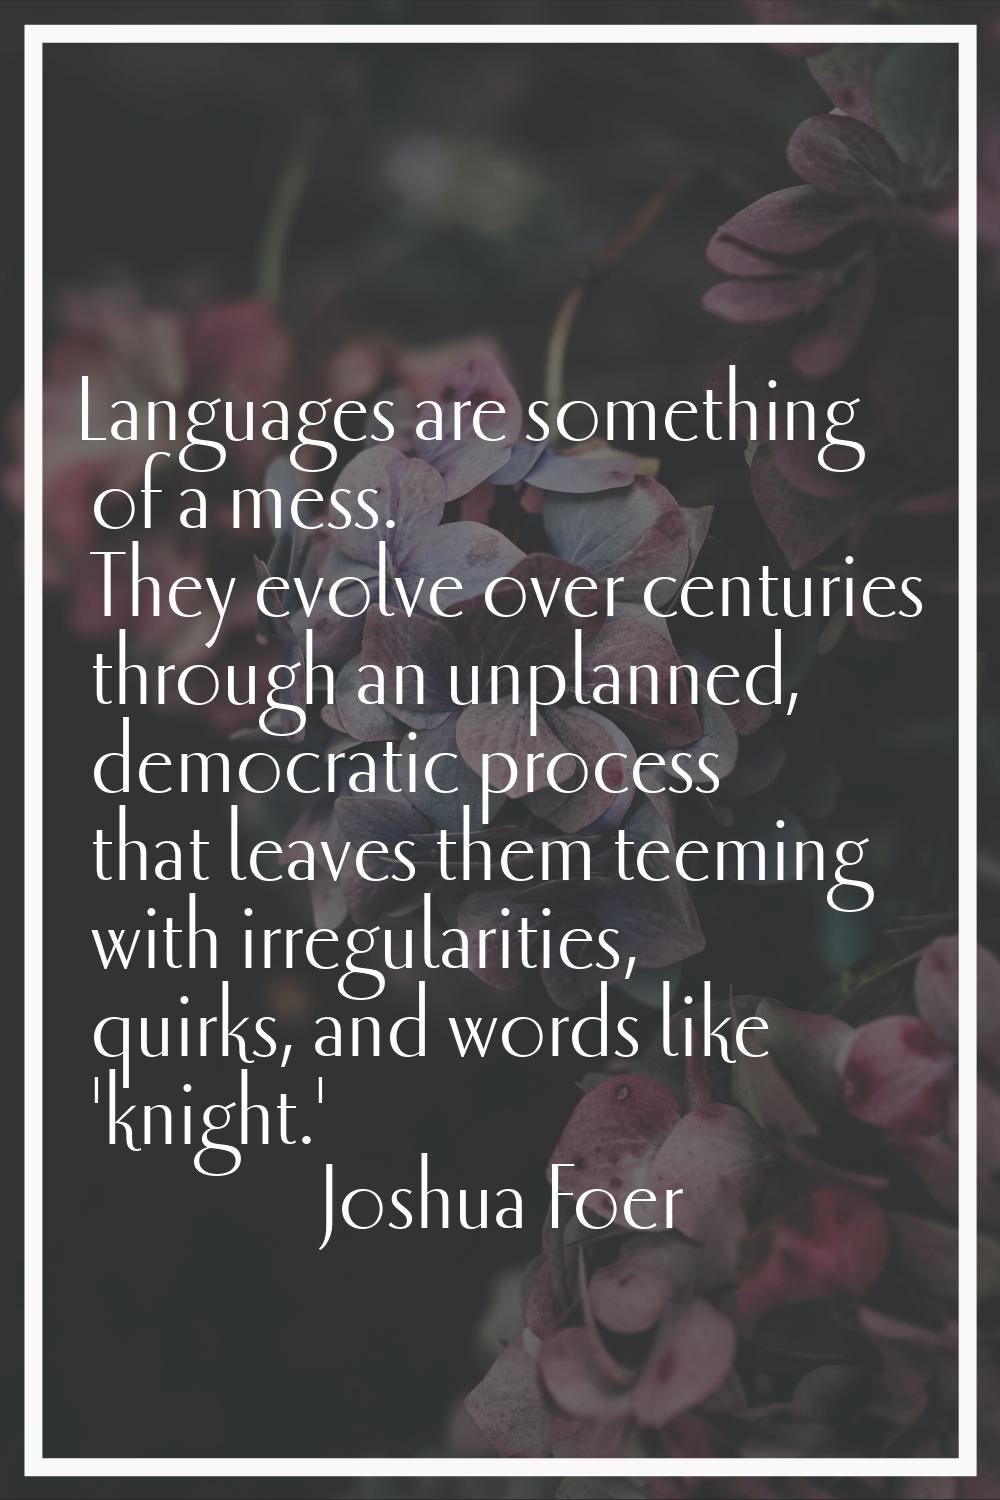 Languages are something of a mess. They evolve over centuries through an unplanned, democratic proc